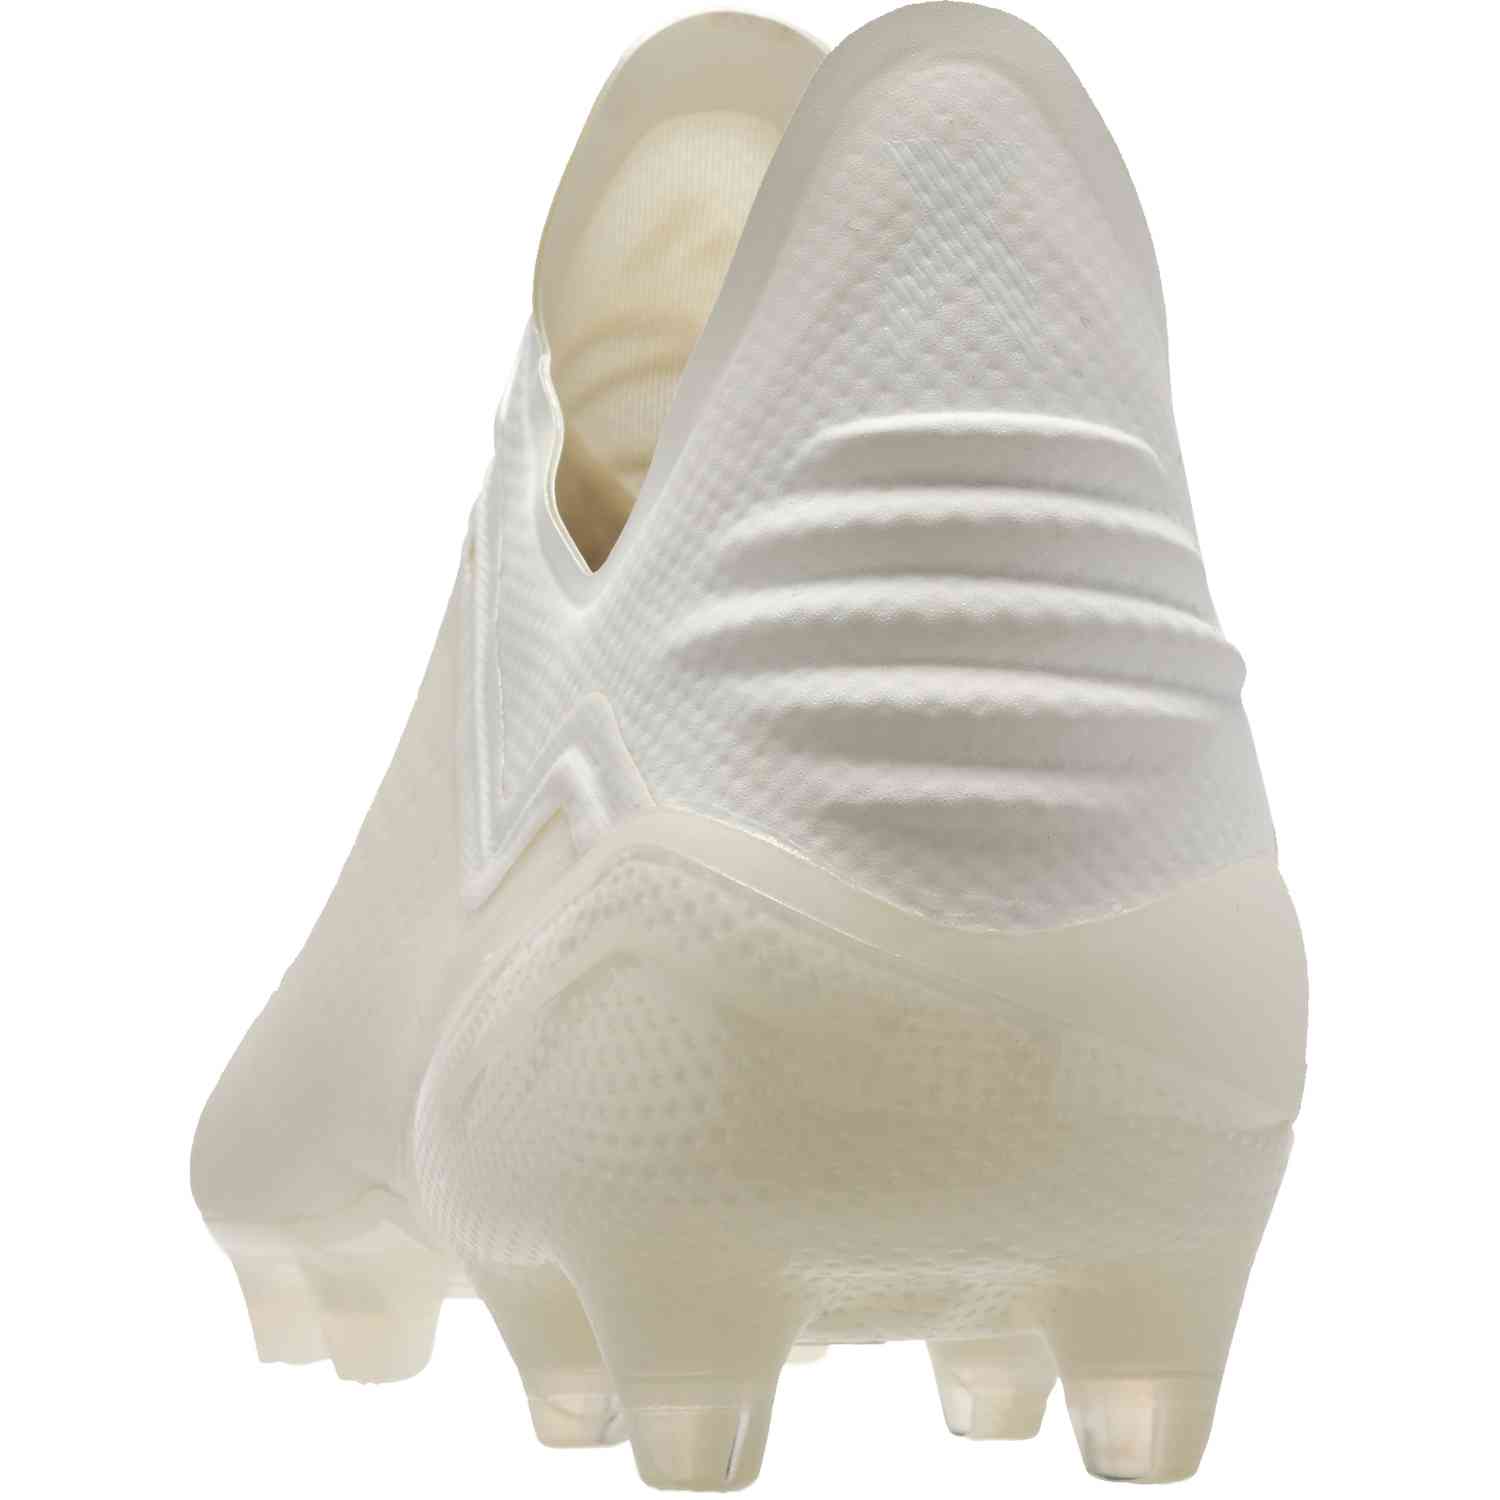 all white adidas soccer cleats